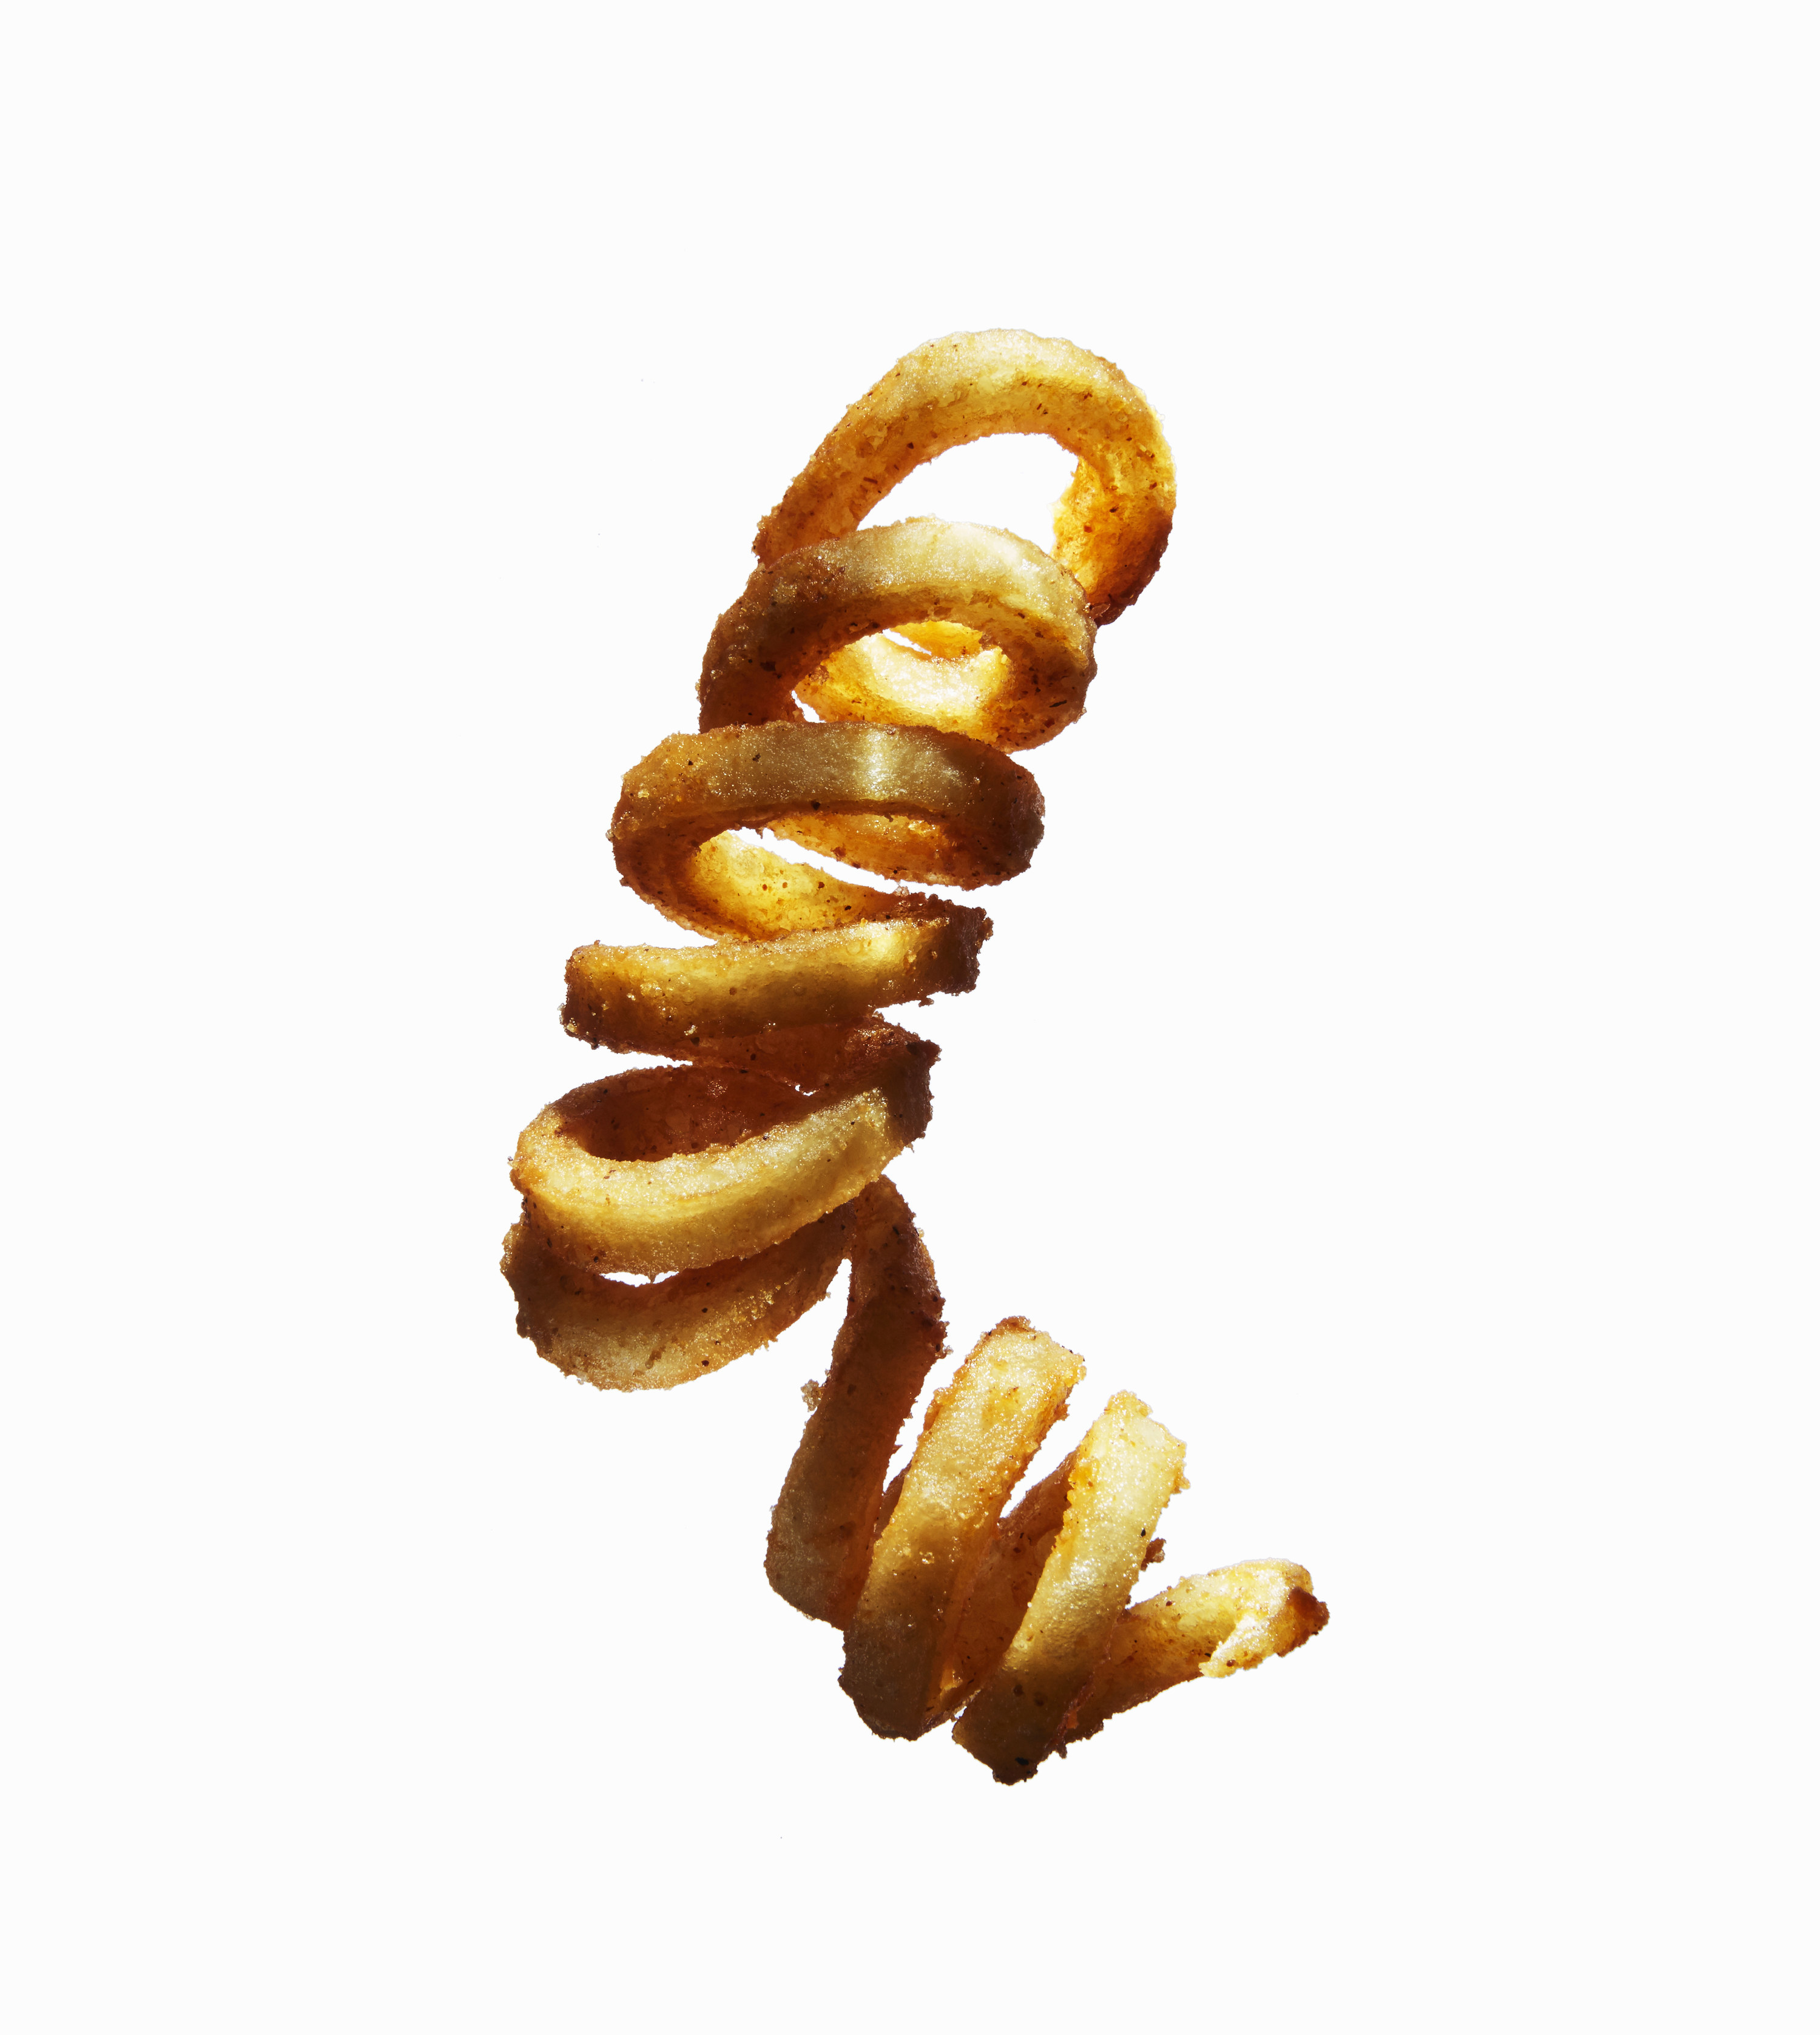 single curly fry on a white background